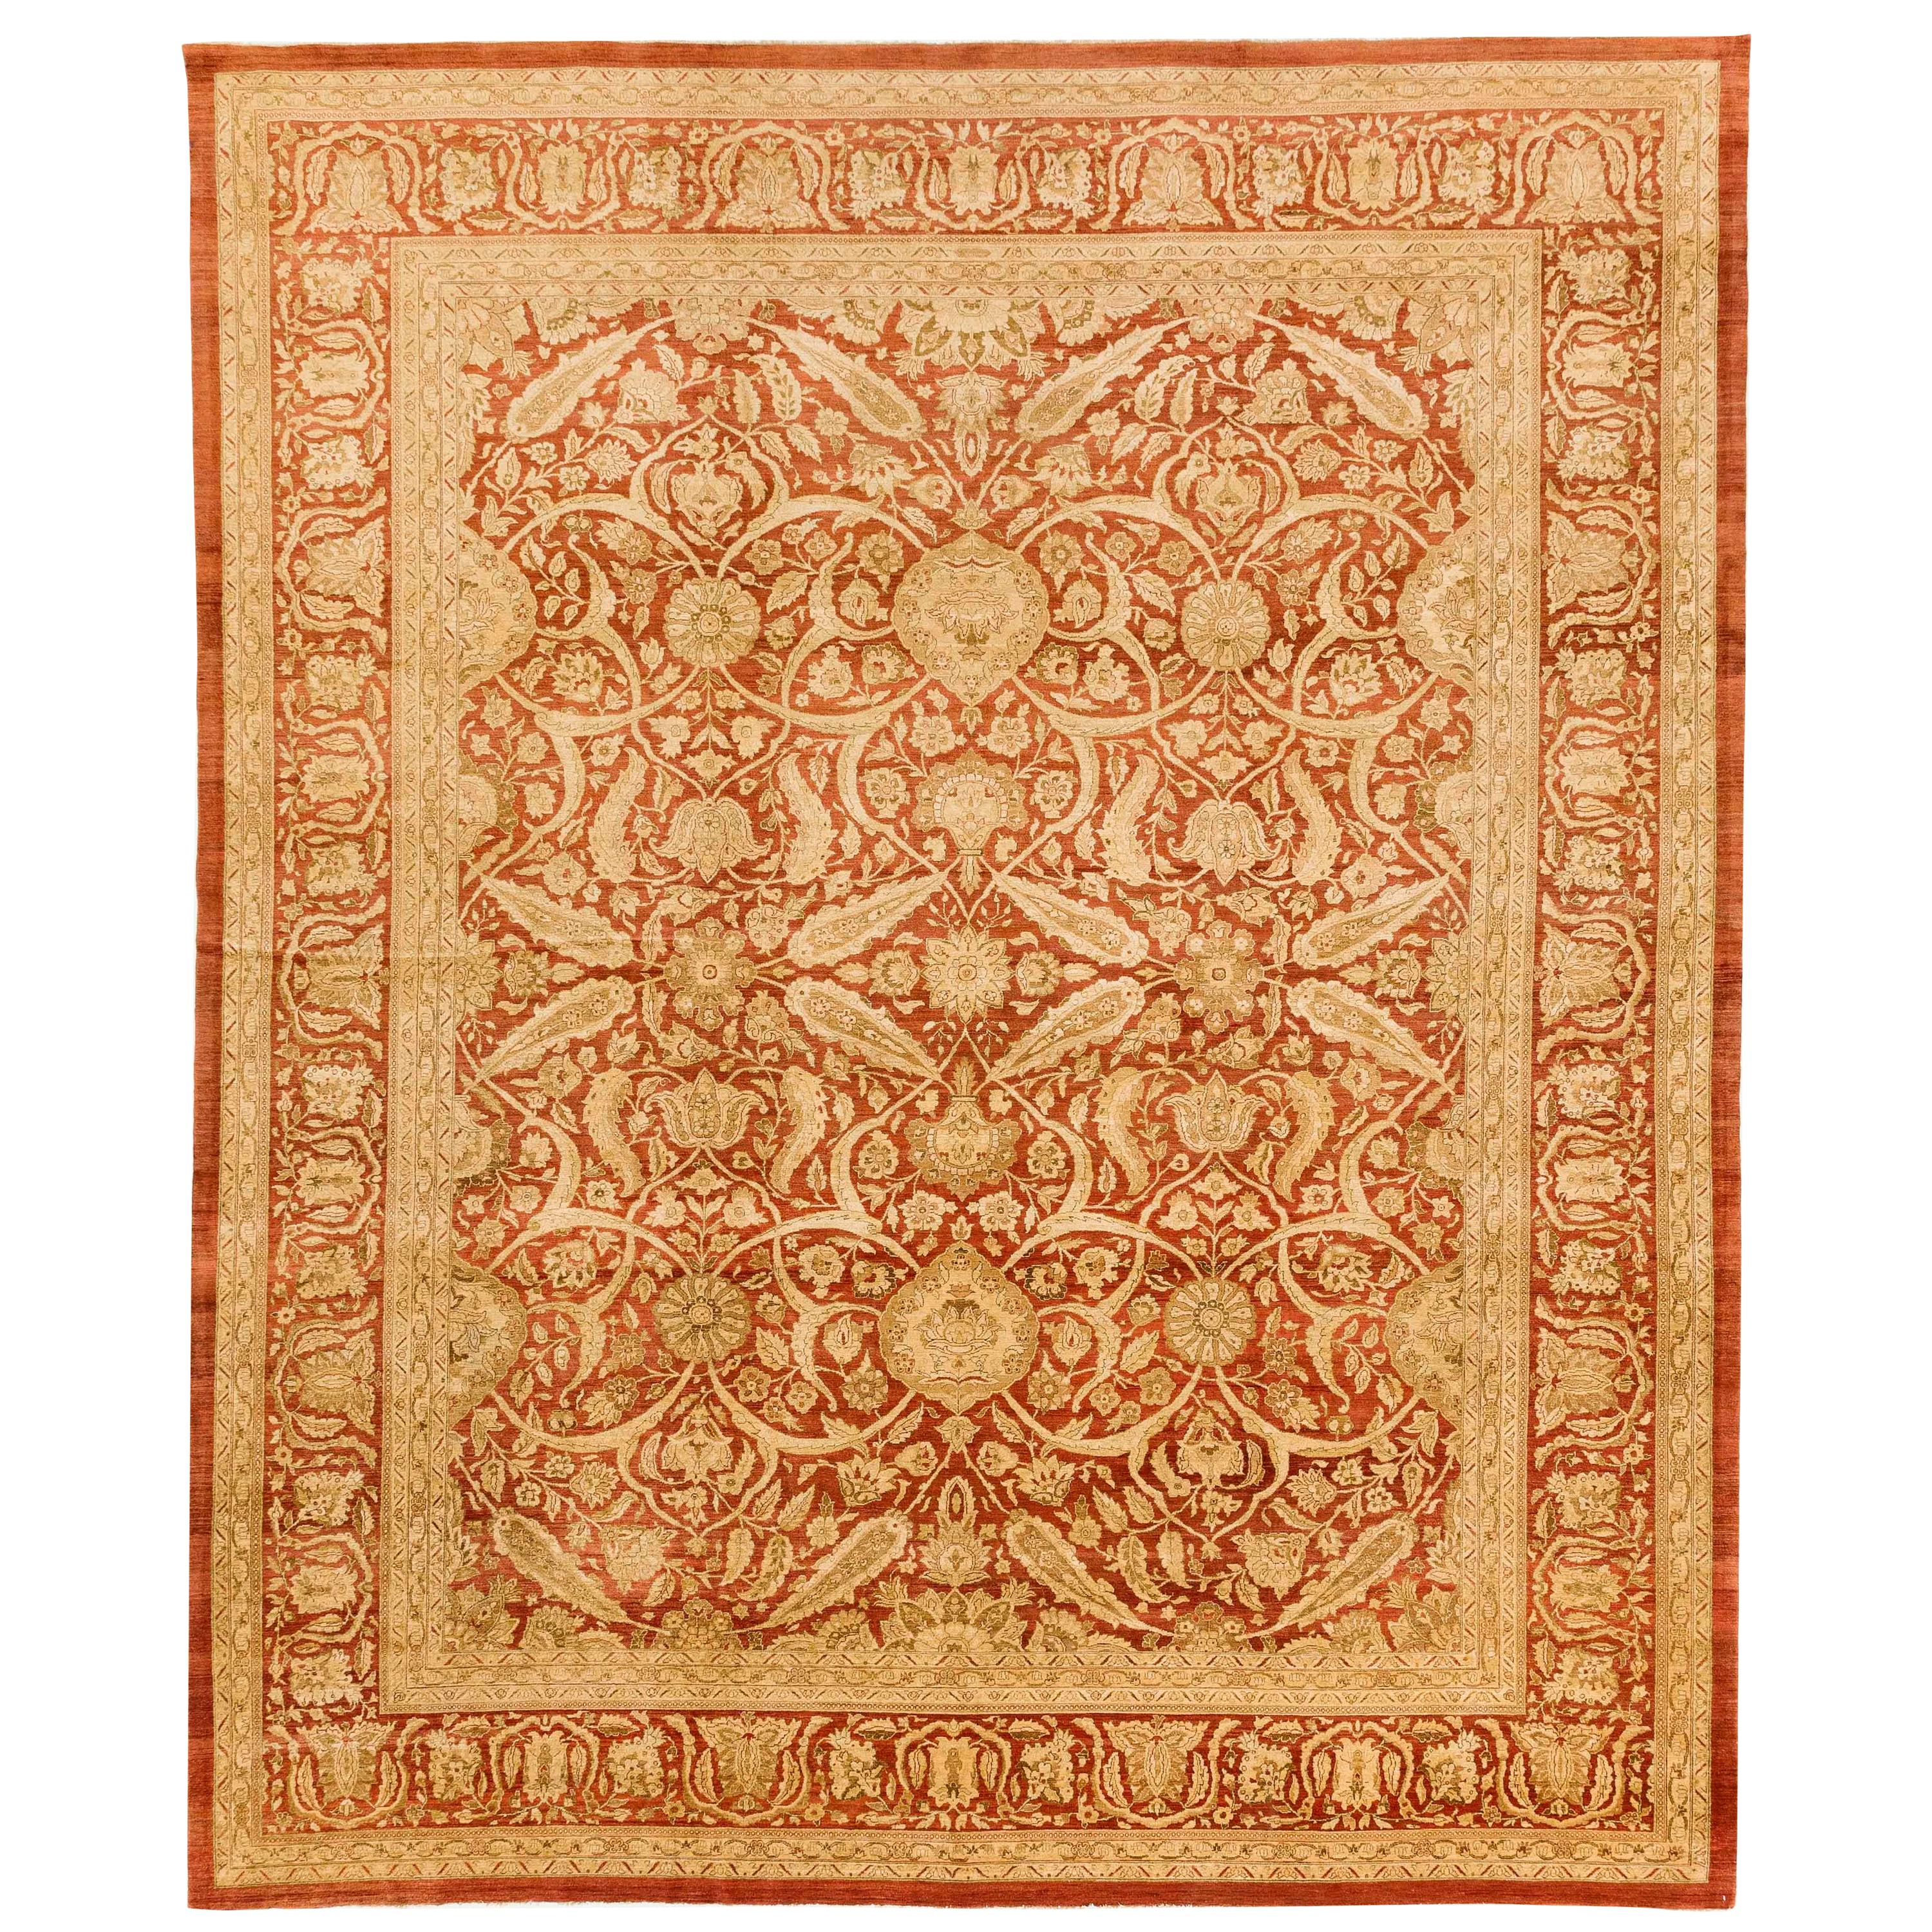 Contemporary Persian Tabriz Rug with Beige and Ivory Flower Motifs on Red Field